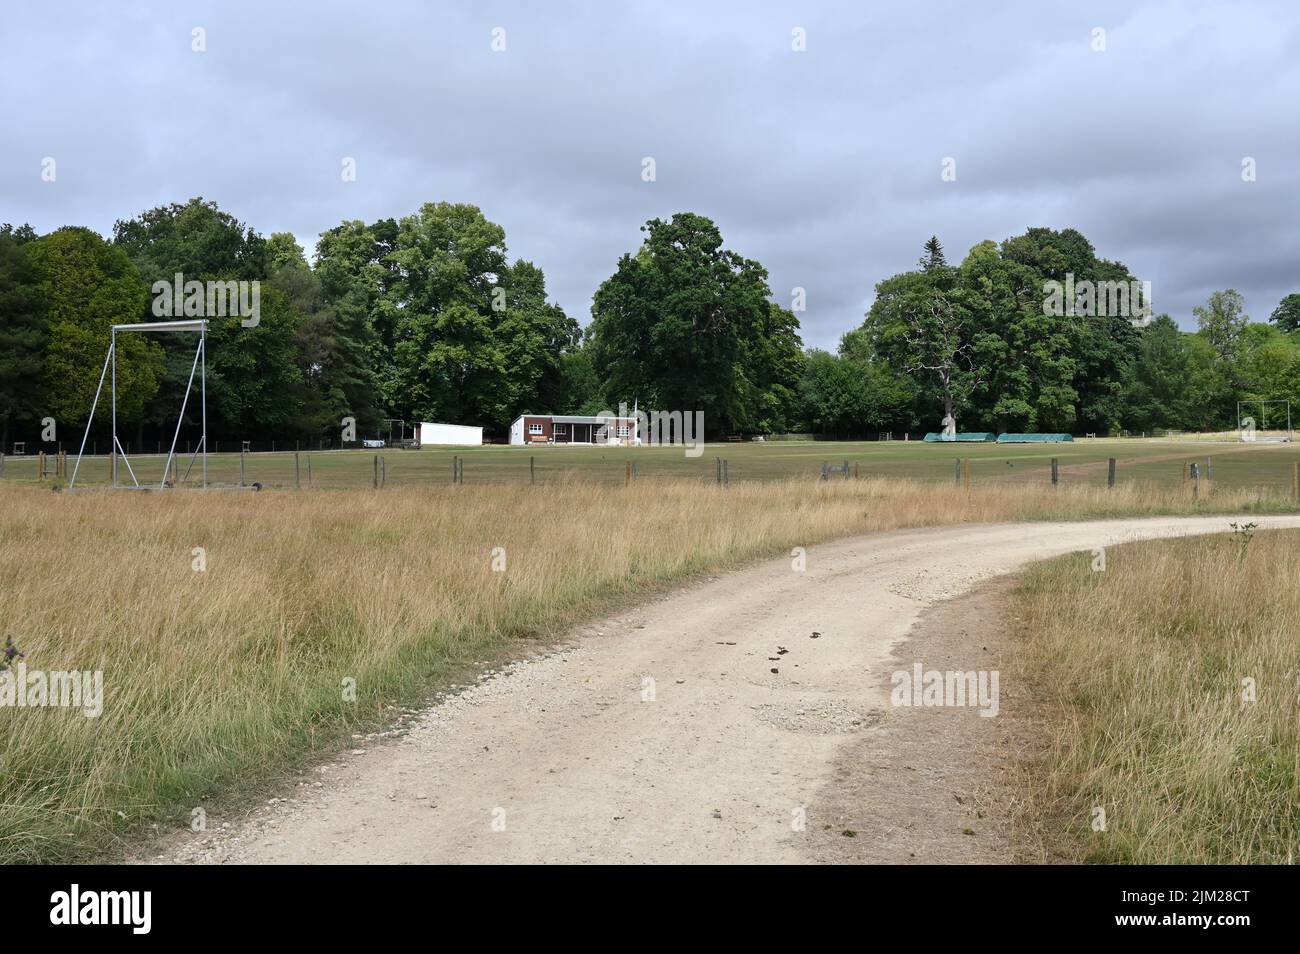 The cricket ground in the Gloucestershire hamlet of Adlestrop sits on the outskirts in the middles of the countryside. Stock Photo